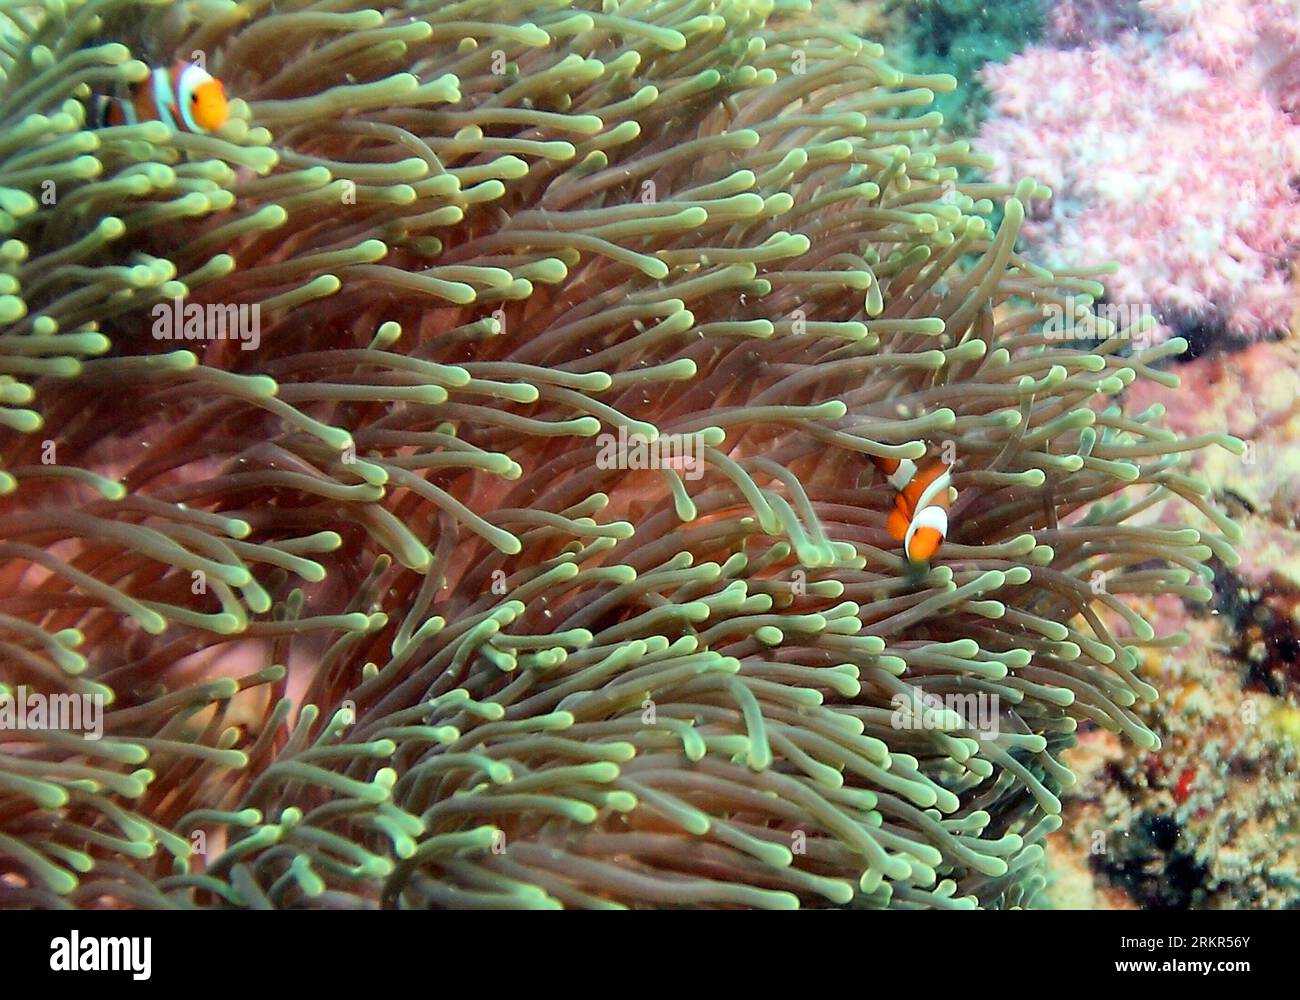 Bildnummer: 58121819  Datum: 17.06.2012  Copyright: imago/Xinhua (120619) -- JAKARTA, June 19, 2012 (Xinhua) -- Two anemone fish swim near sea anemones living on the coral reefs in the sea off the Thousand Islands, Indonesia, on June 17, 2012. Reef-building corals have colonized every tropical ocean, shaped and protected thousands of kilometers of coastline and influenced marine evolution for millions of years. However, as a result of the rising sea level, growing ocean temperature, and increasing atmospheric carbon dioxide level that lead to the acidification of the ocean, reef-building coral Stock Photo